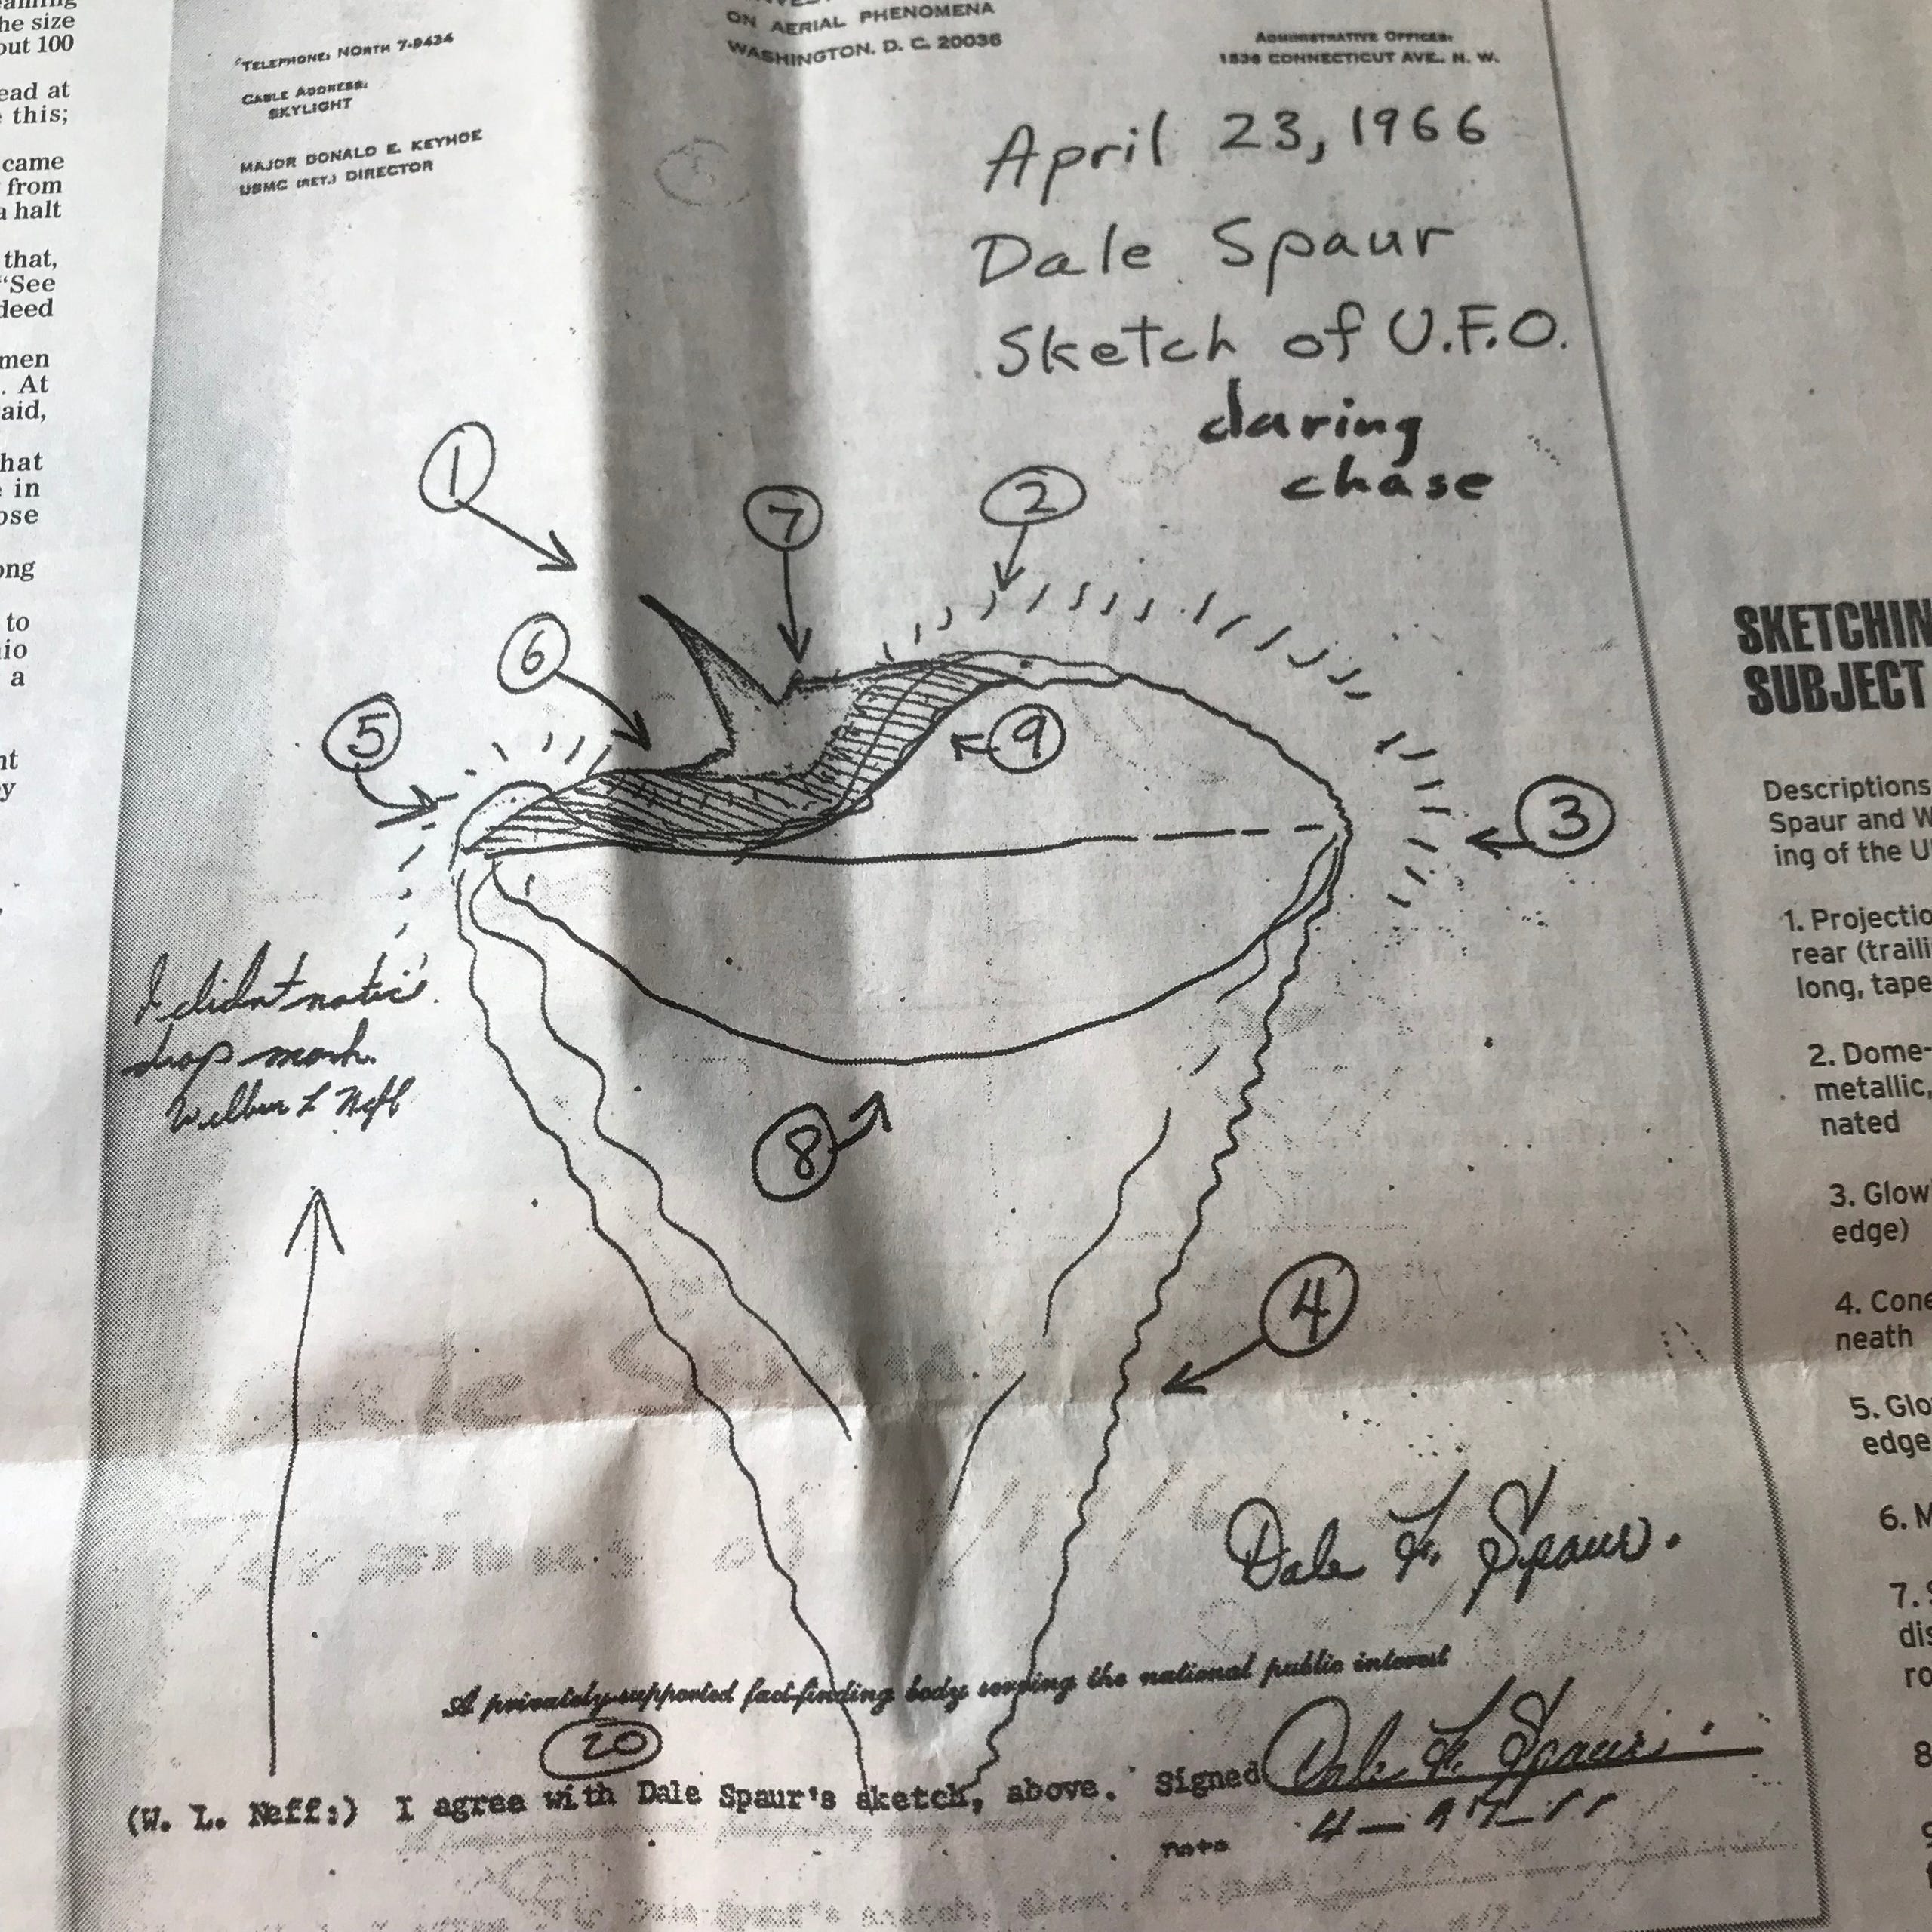 Portage County deputies Dale Spaur and William Neff provided this 1966 sketch of the UFO they saw to the National Investigations Committee of Aerial Phenomenon.